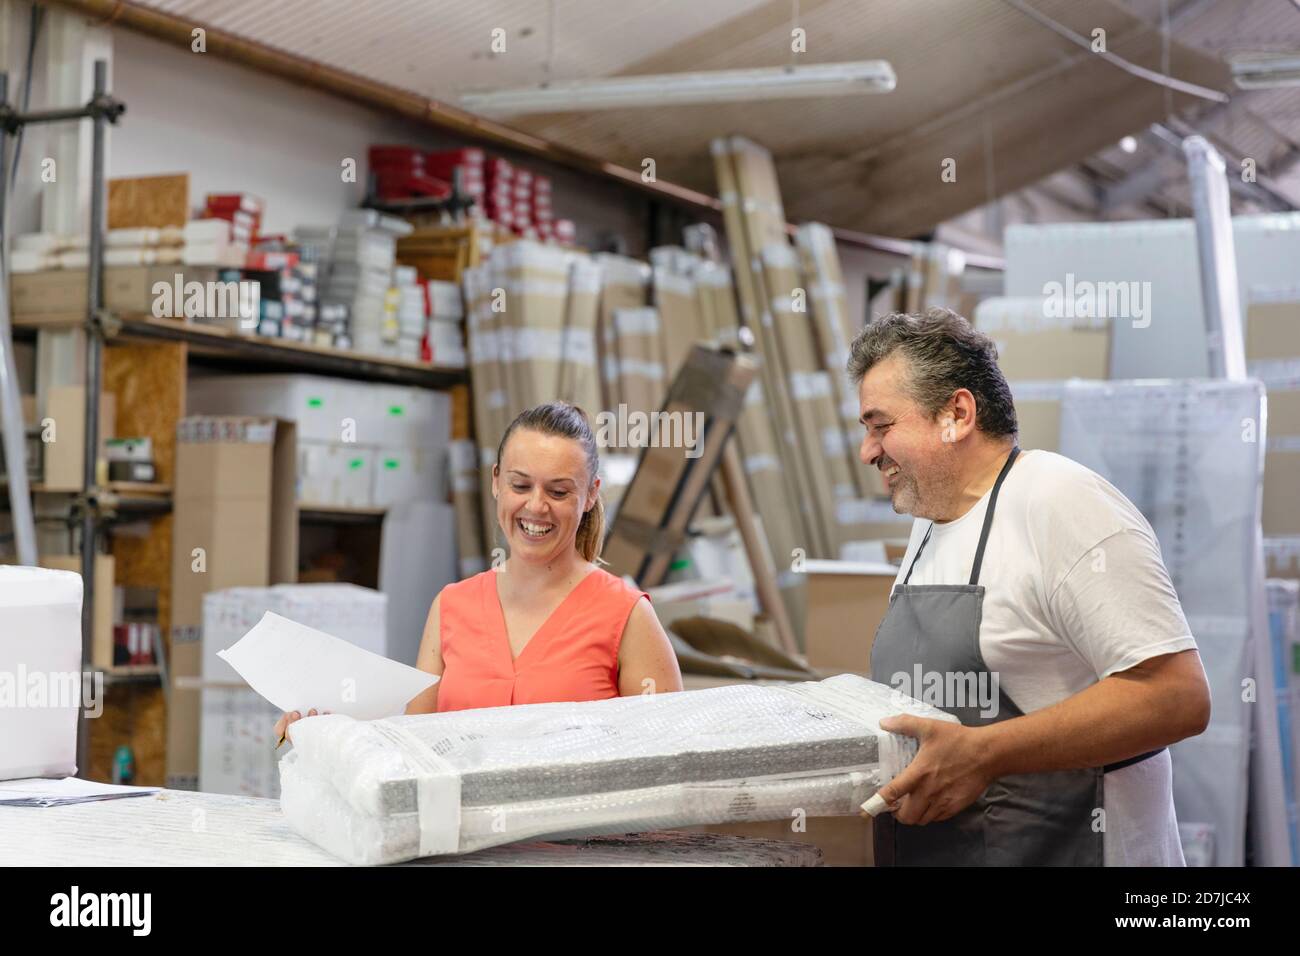 Smiling coworker and secretary working while standing at factory Stock Photo